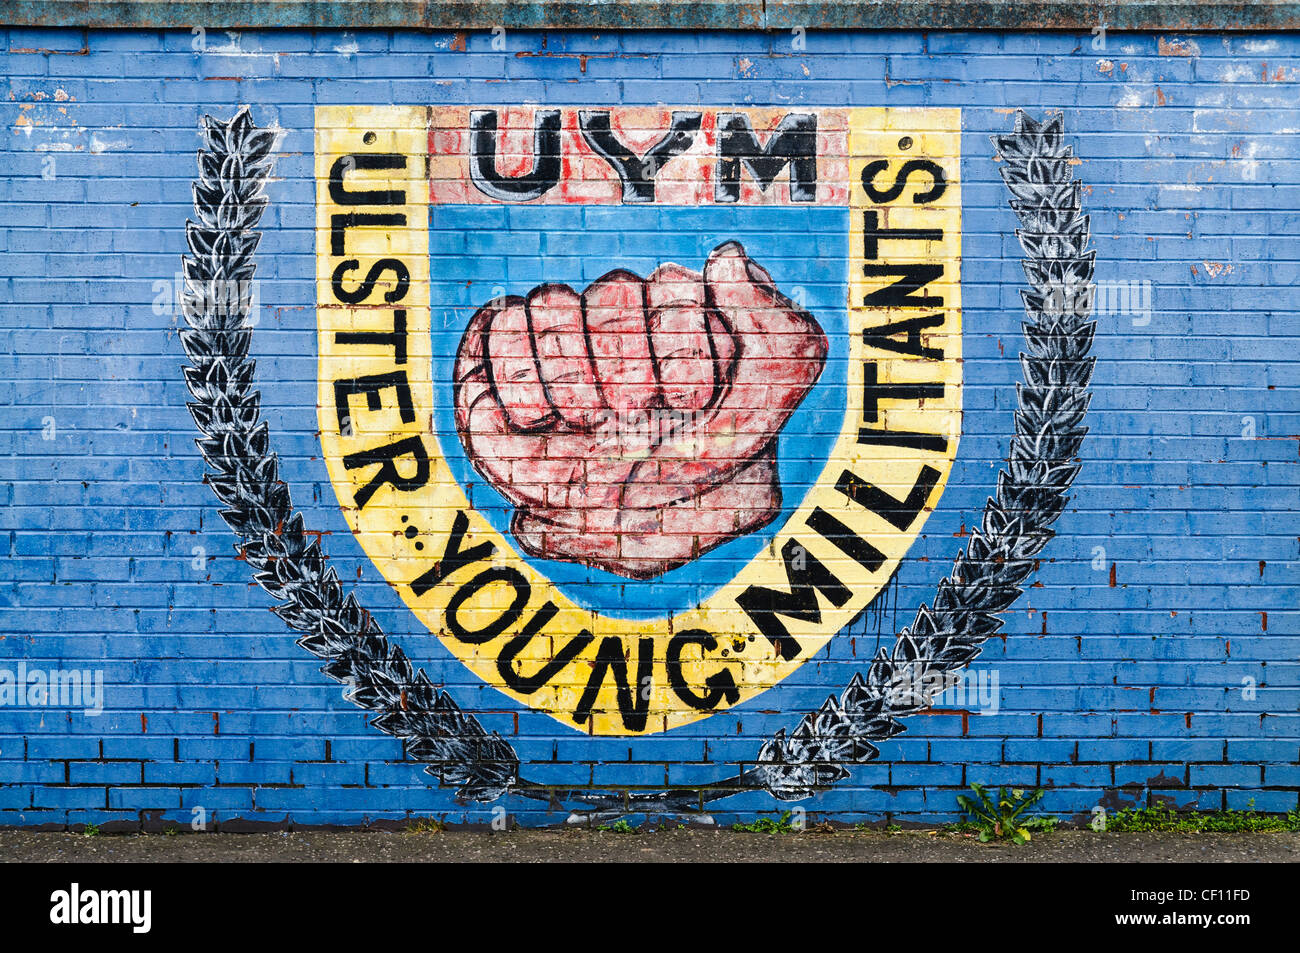 Ulster Young Militants mural in East Belfast Stock Photo